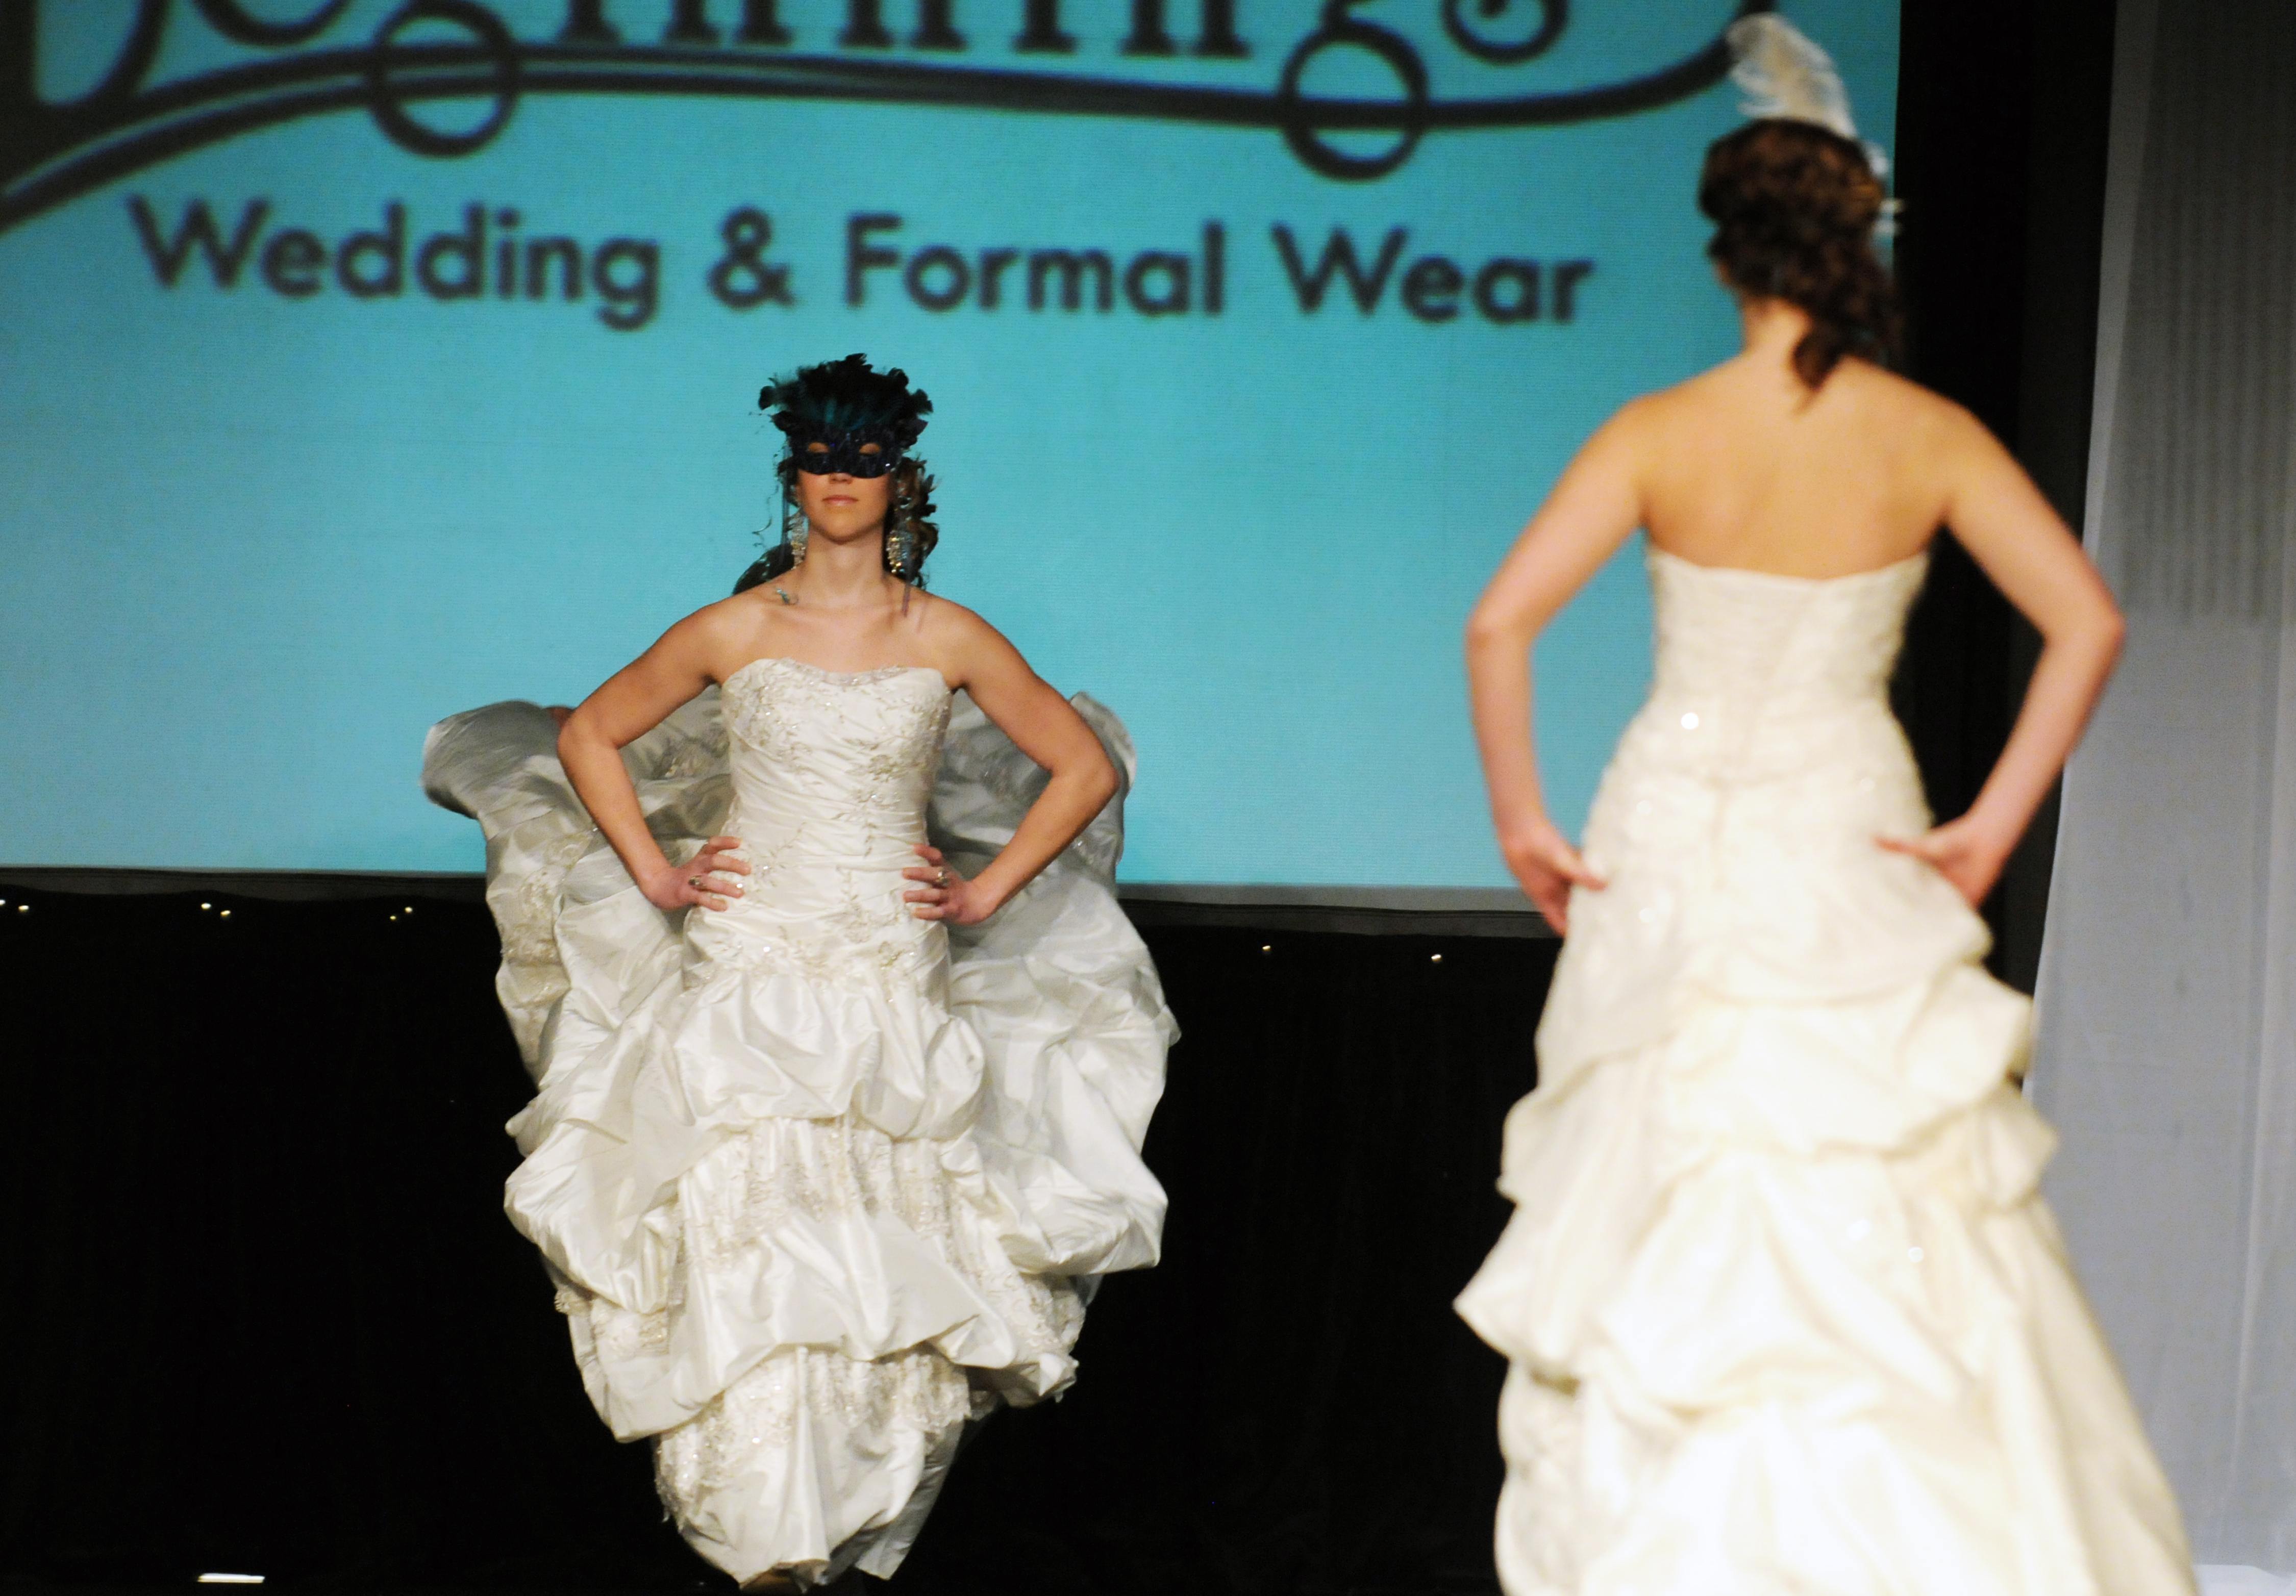 THE RUNWAY- Wedding gowns from shops all over Red Deer were showcased at the With This Ring Bridal Gala this past weekend at the Westerner.